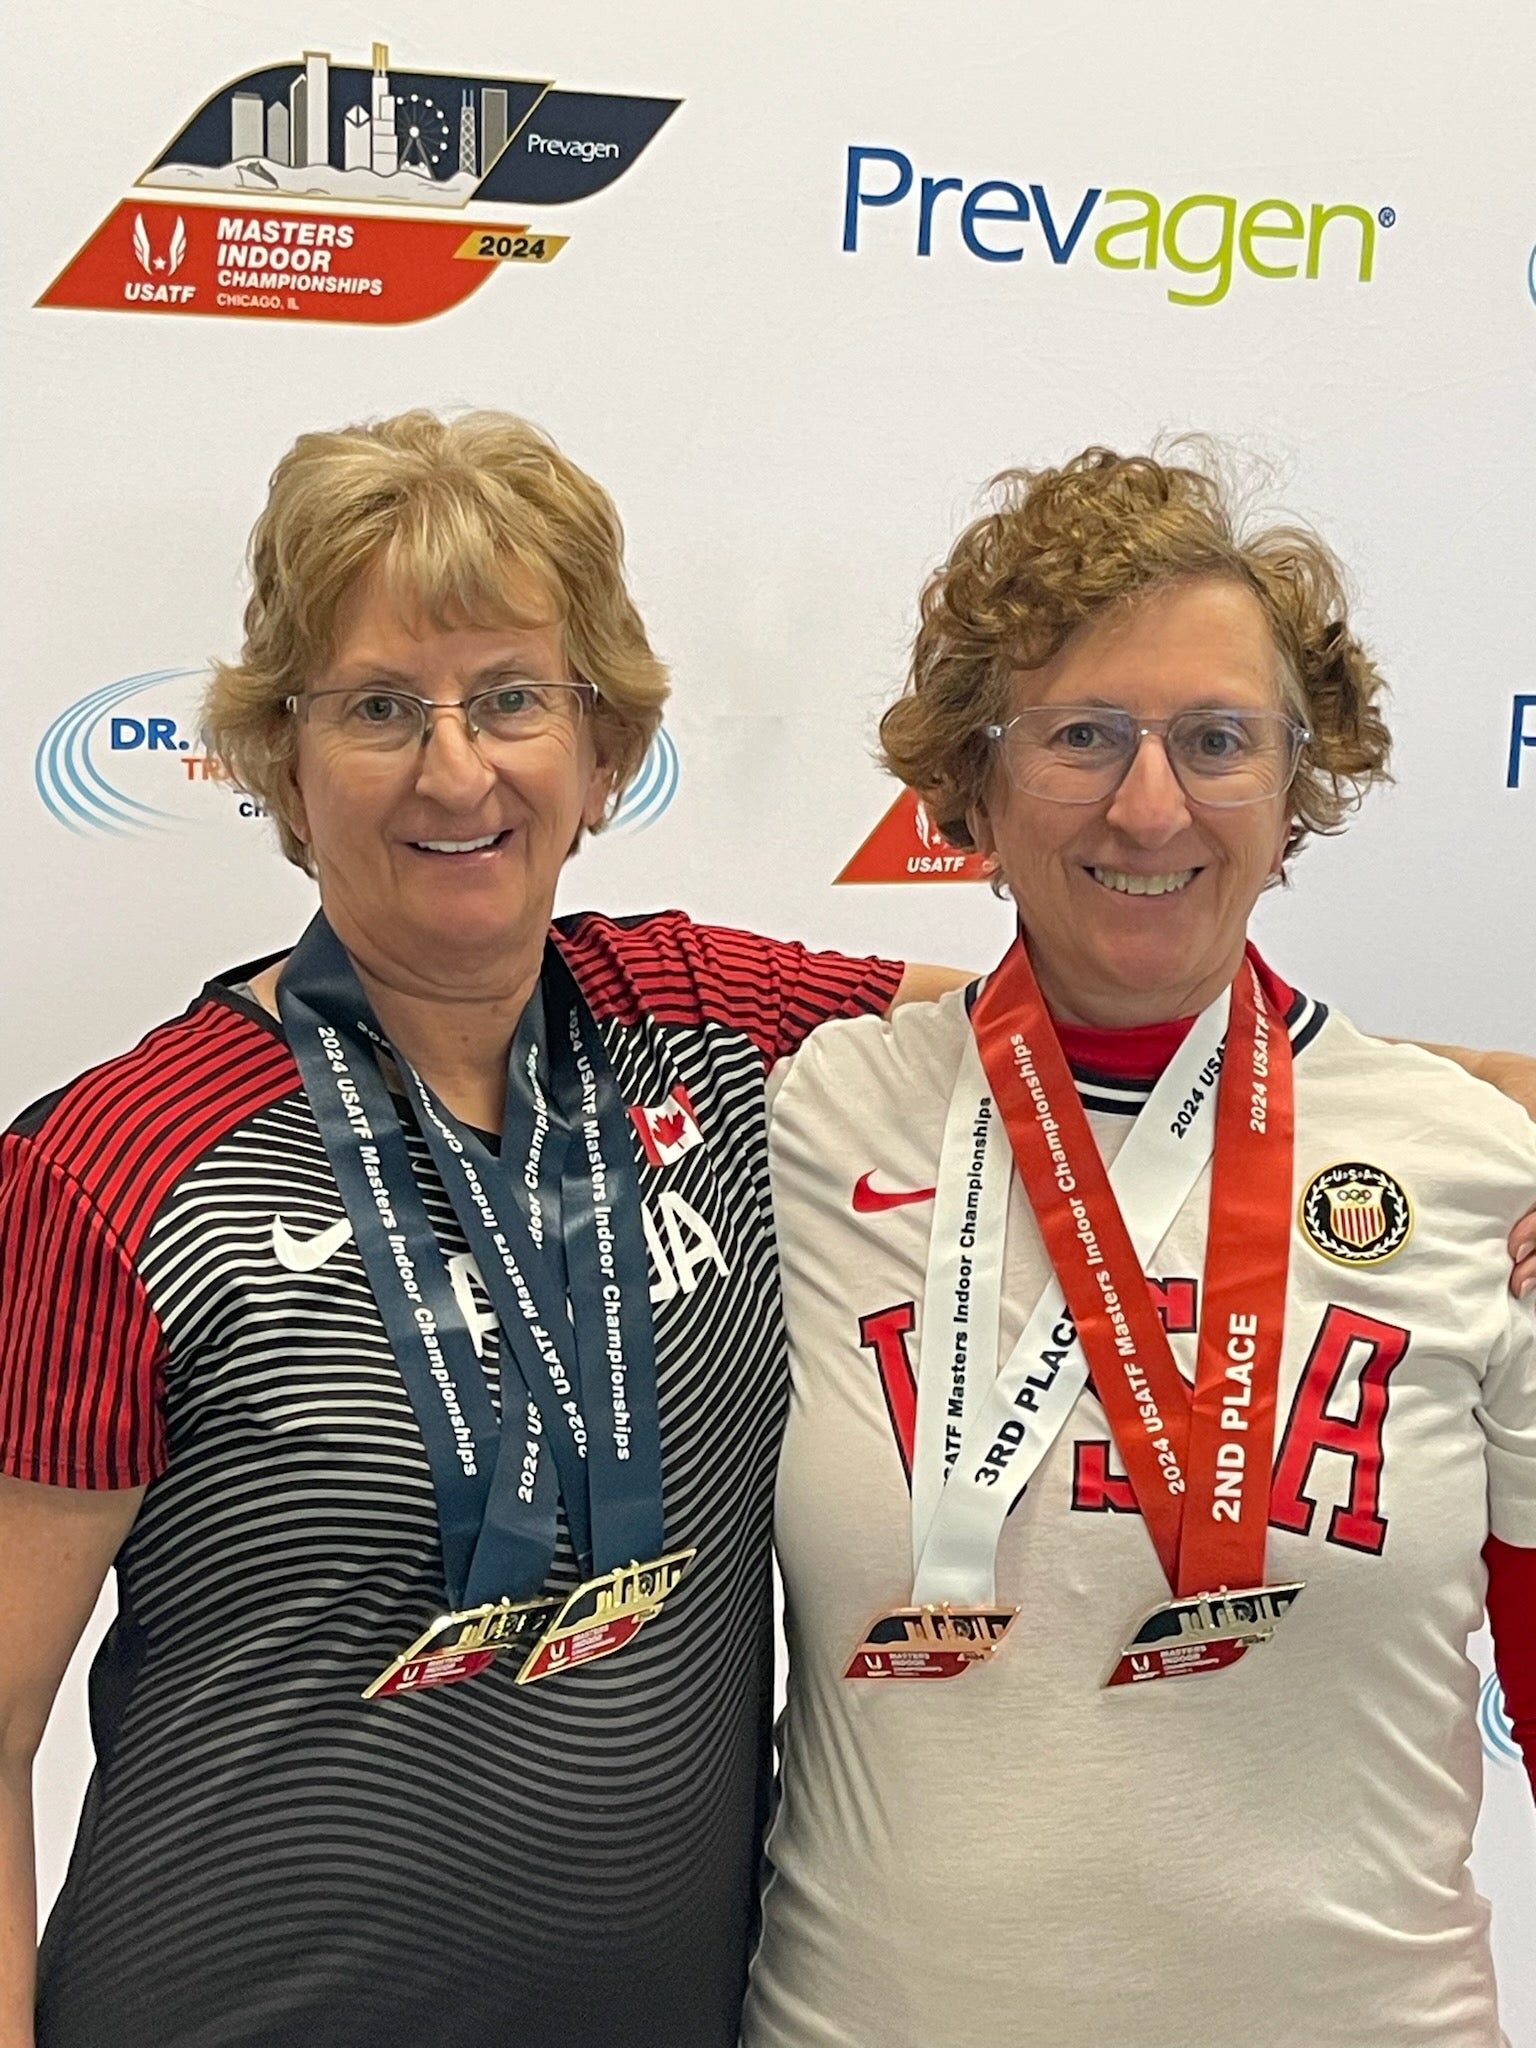 Women Shine In USATF Masters Indoors. Sisters Are Part Of Windy City Wave.